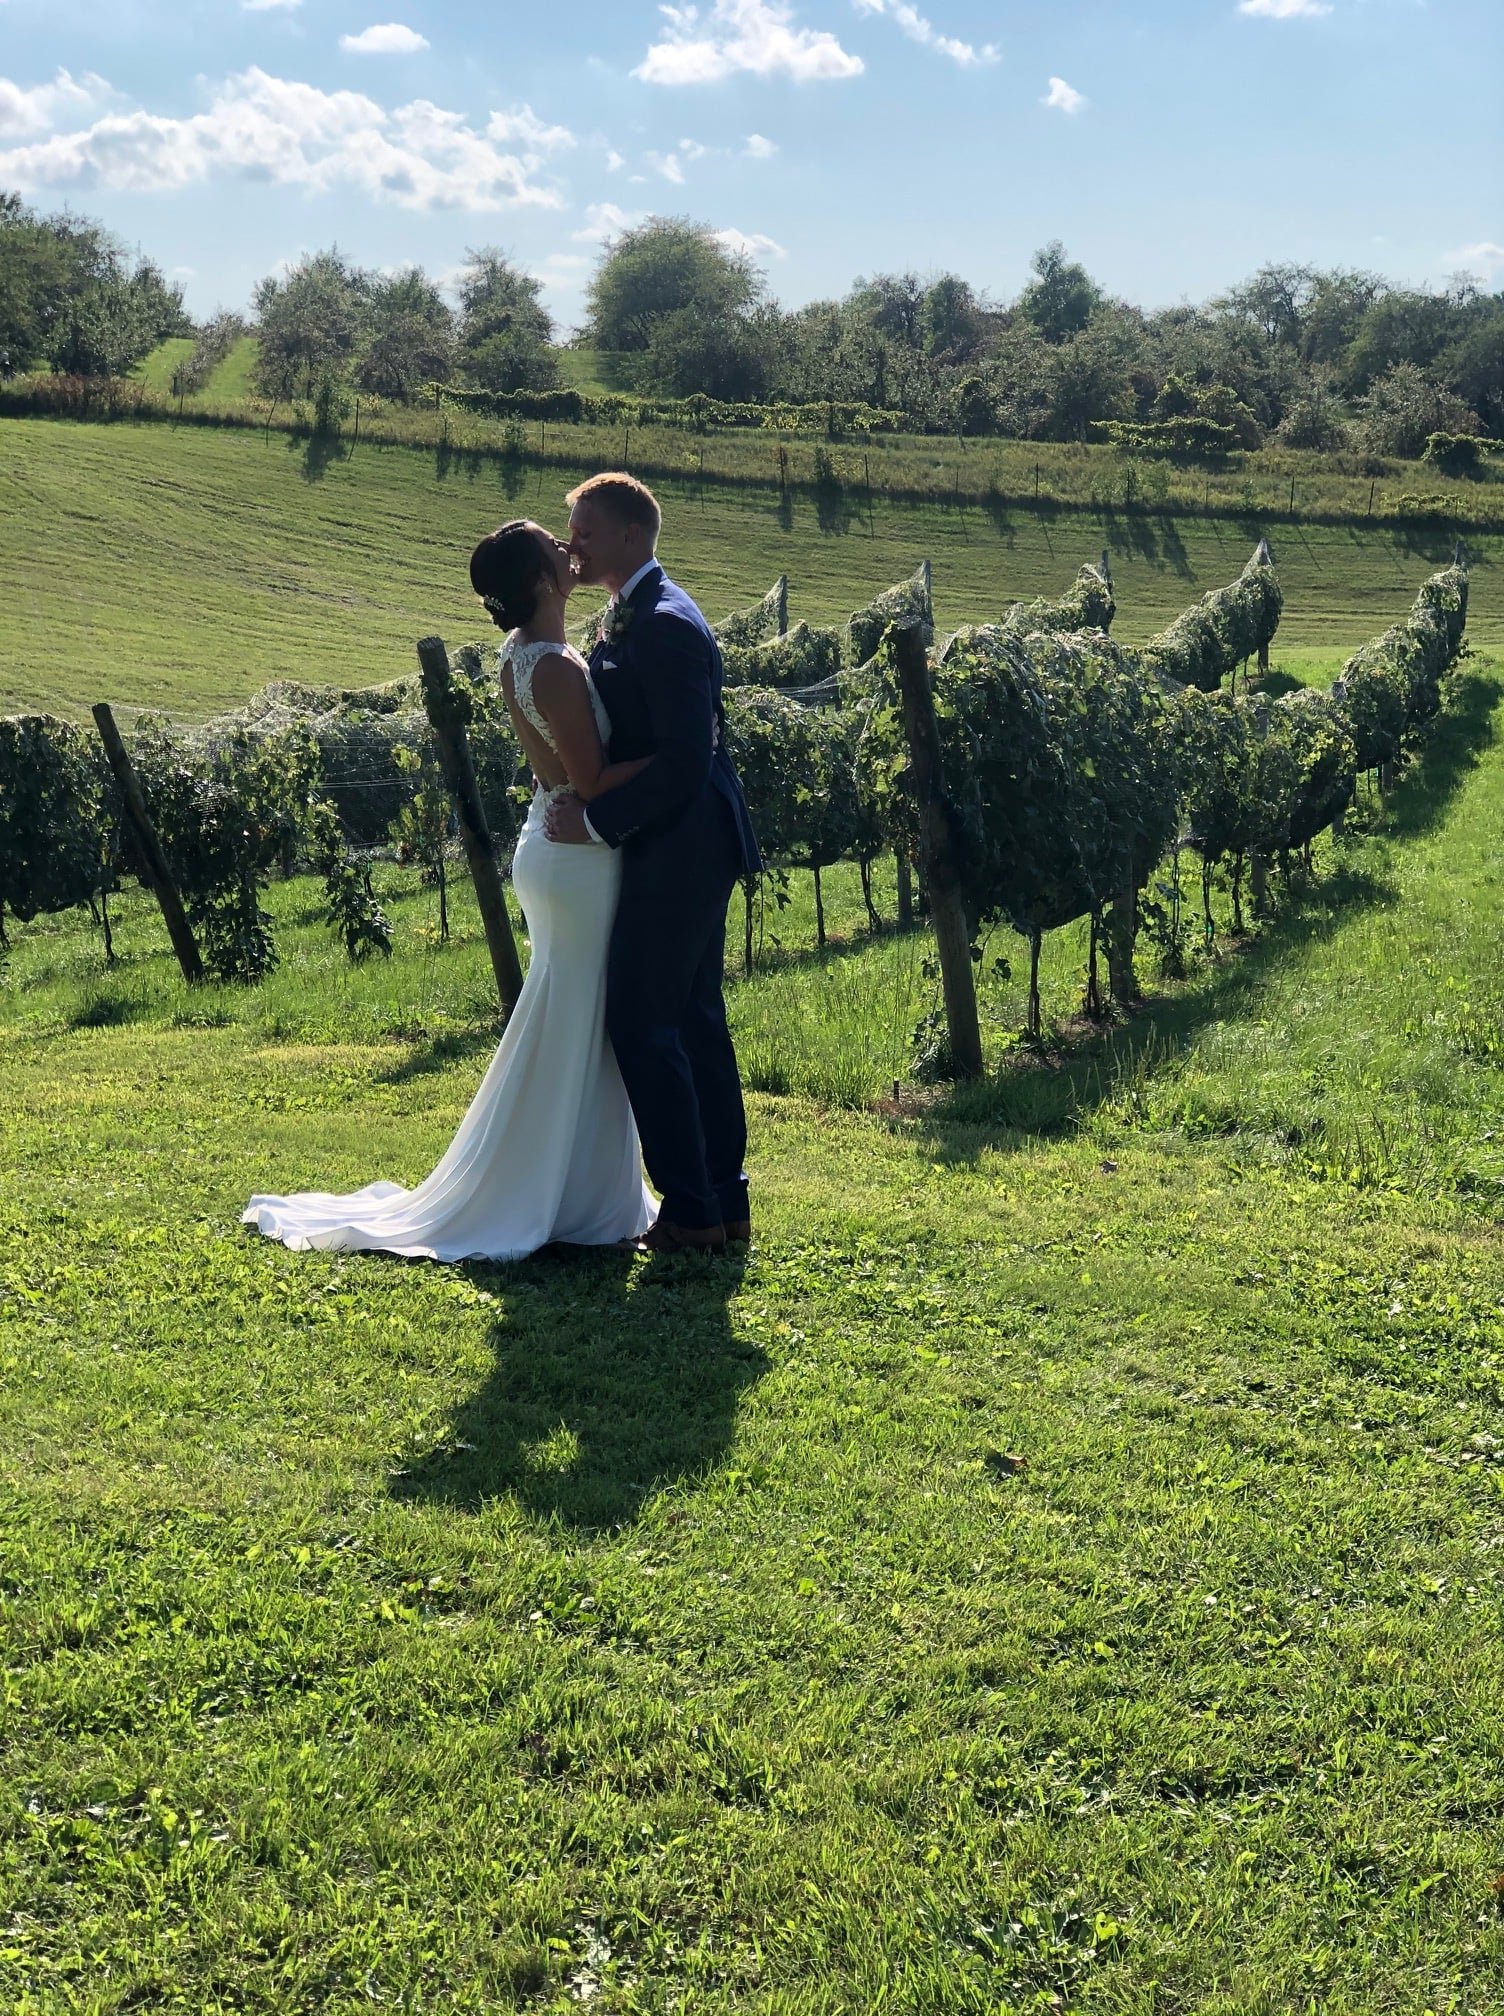 PLW + Itasca Vines + Couple + Kiss + First Look.jpg